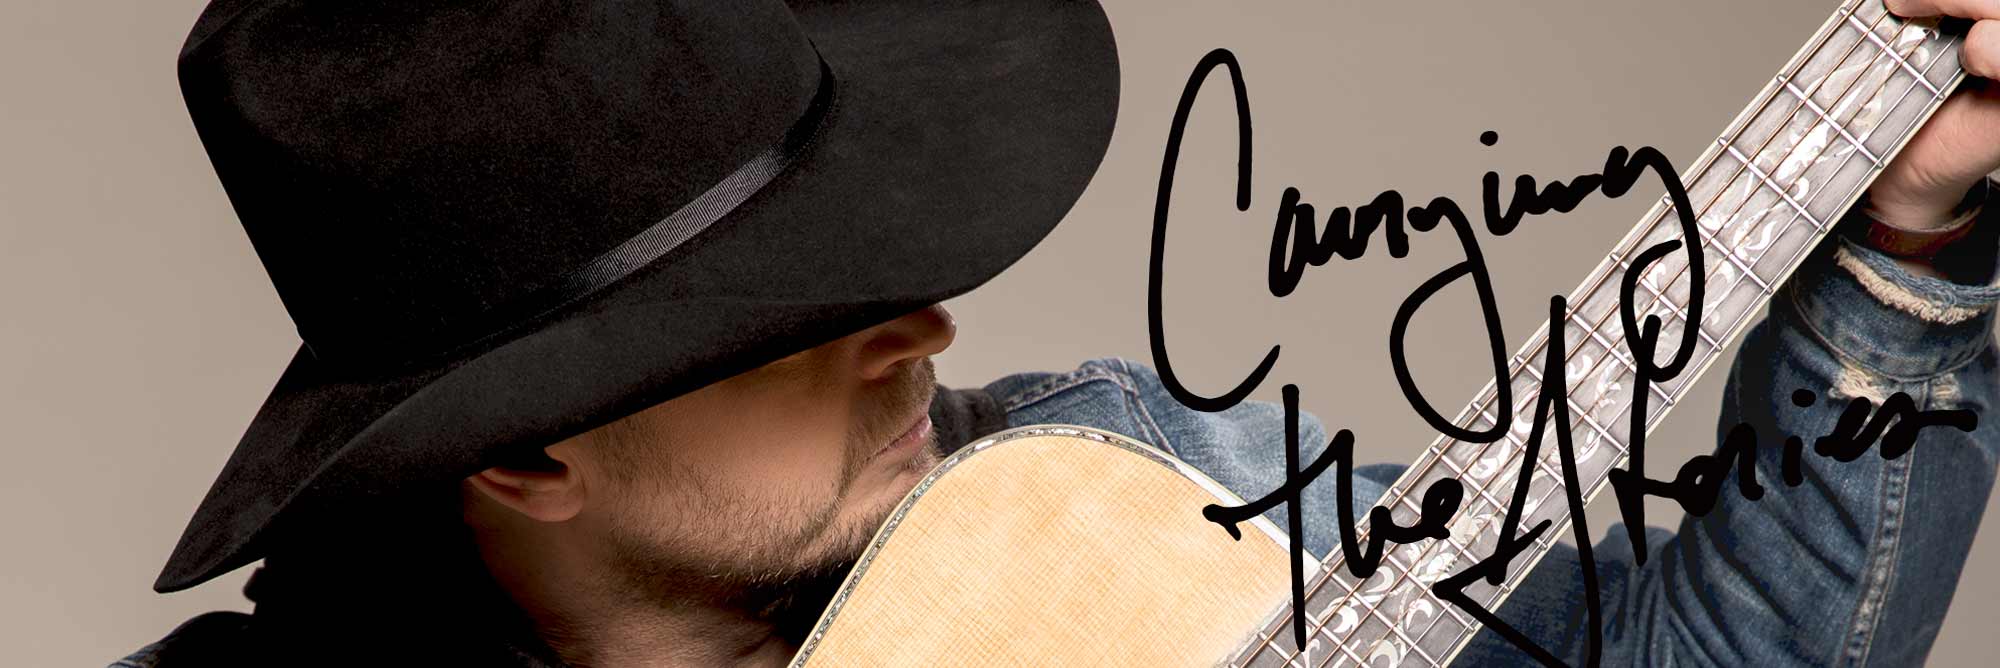 Paul Brandt holds a guitar close and strums the strings gently